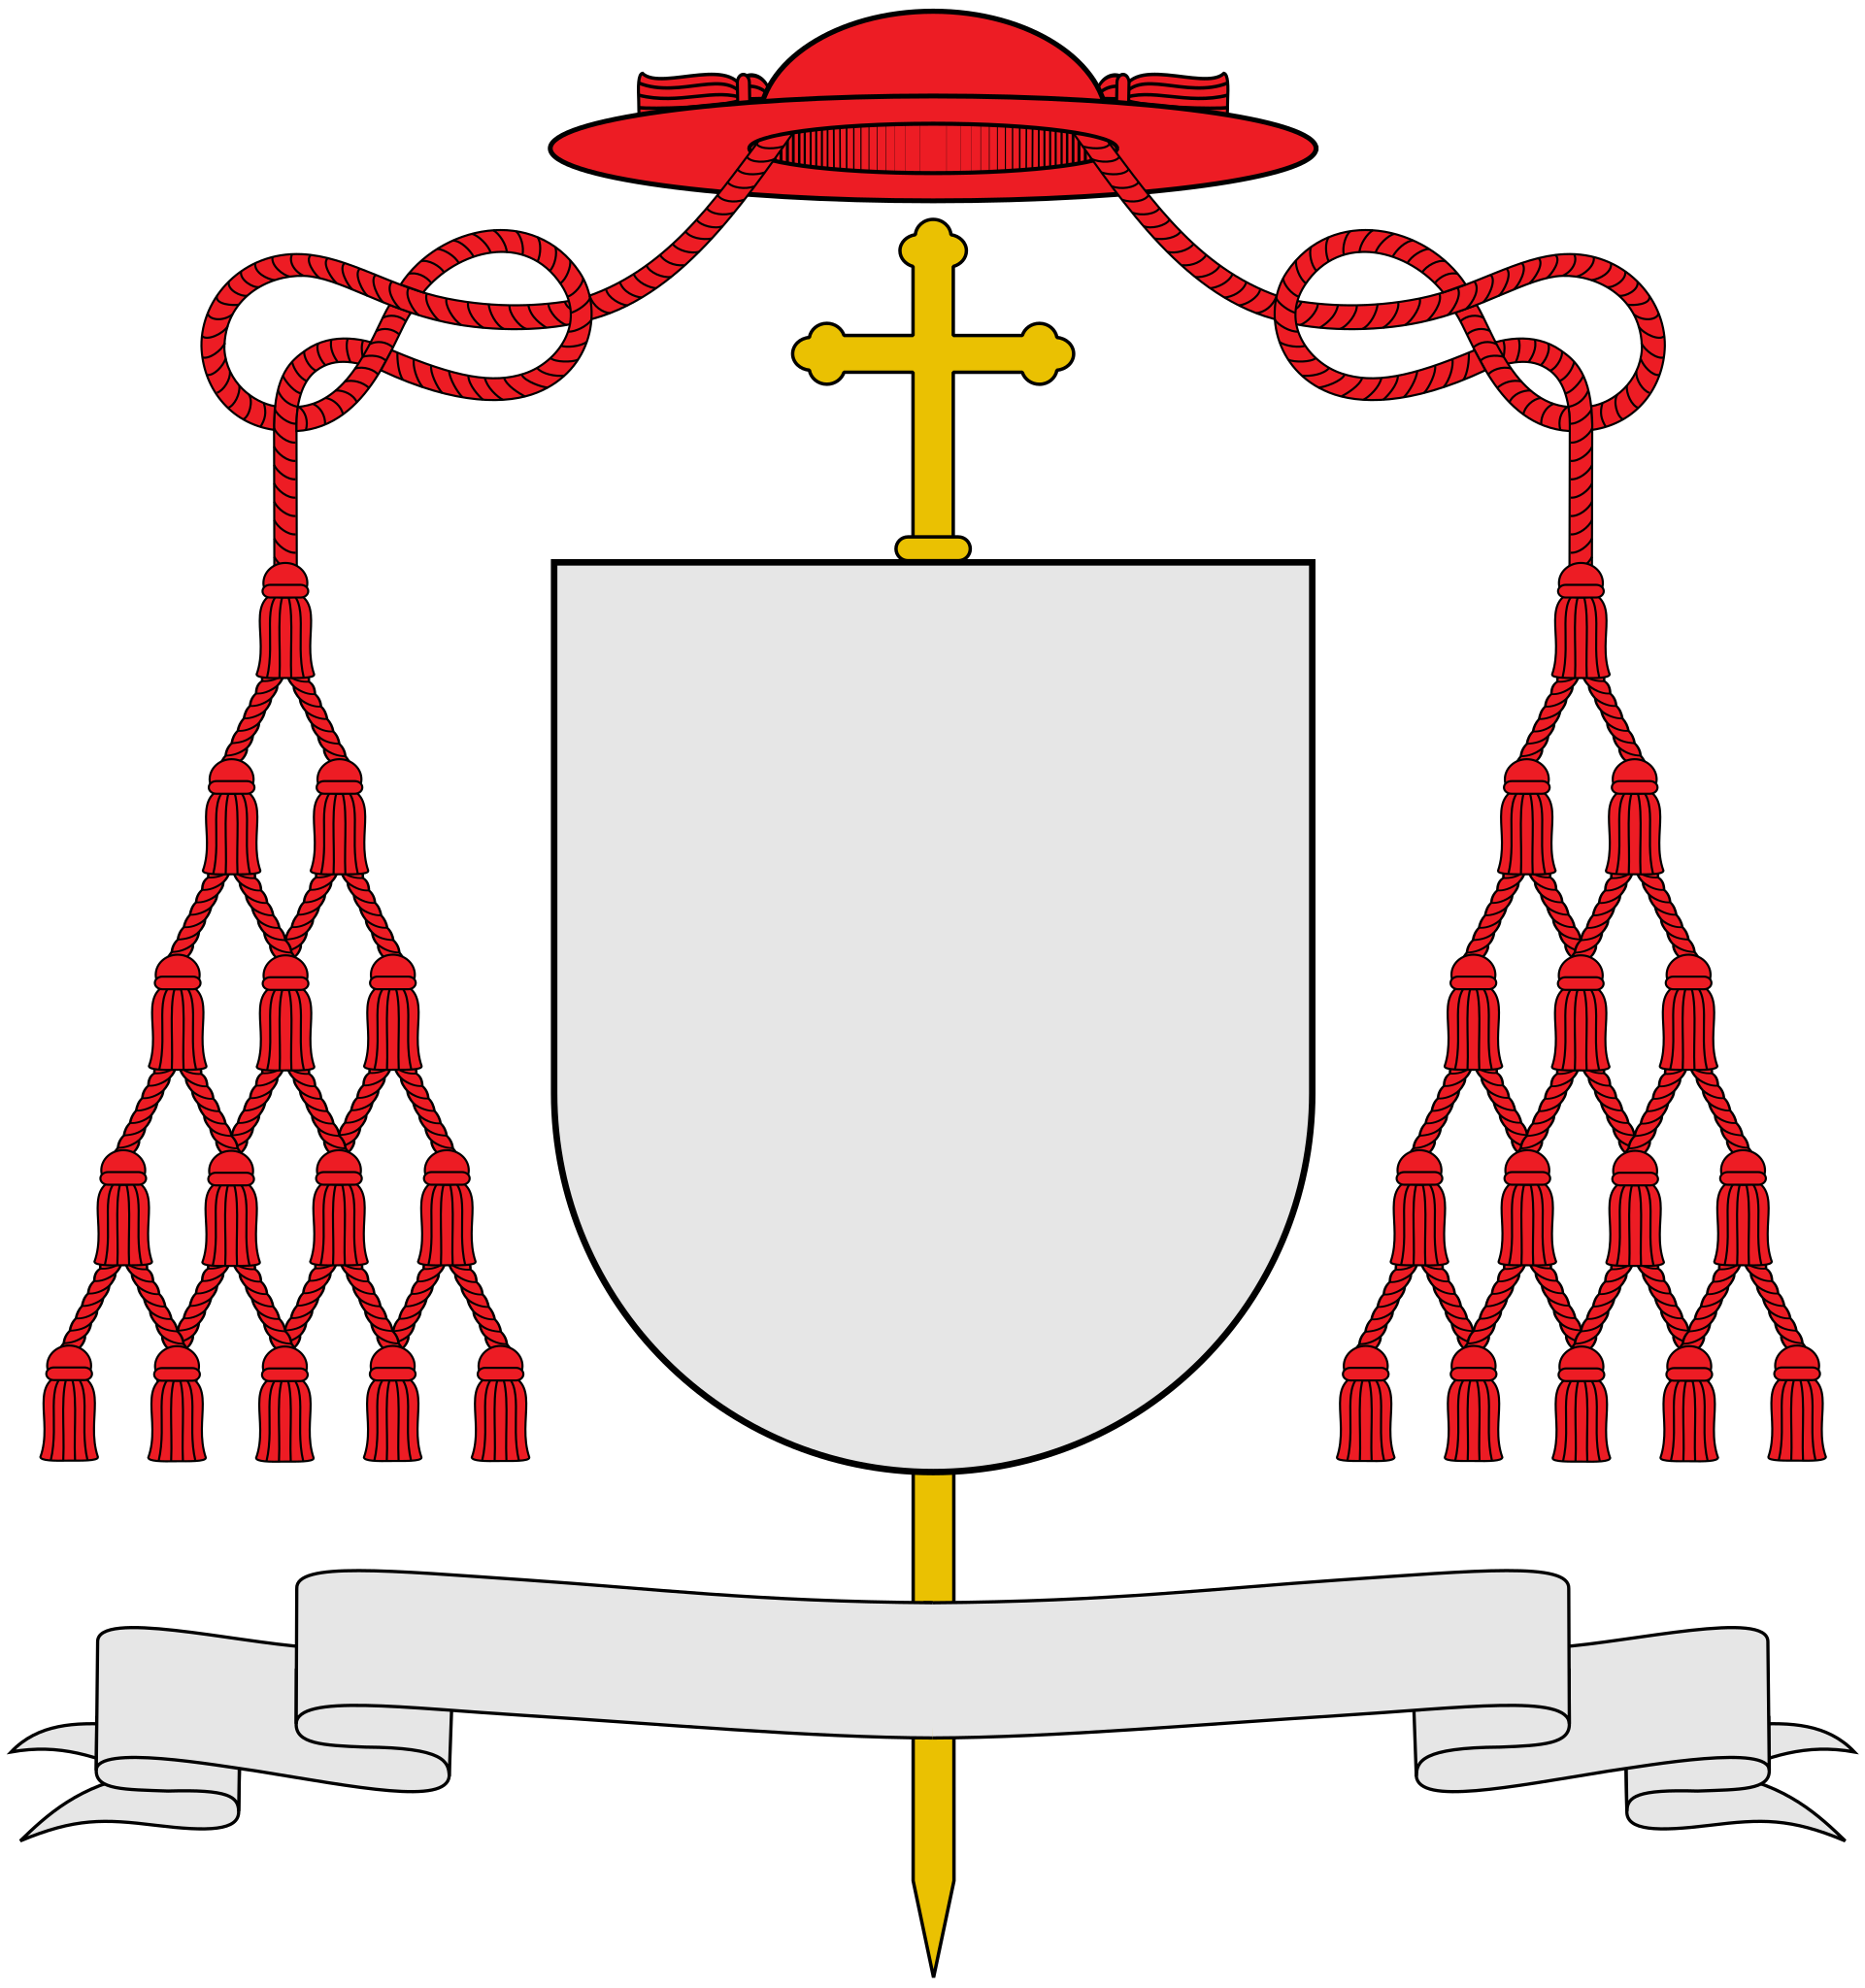 File:Christian cross (red).svg - Wikimedia Commons